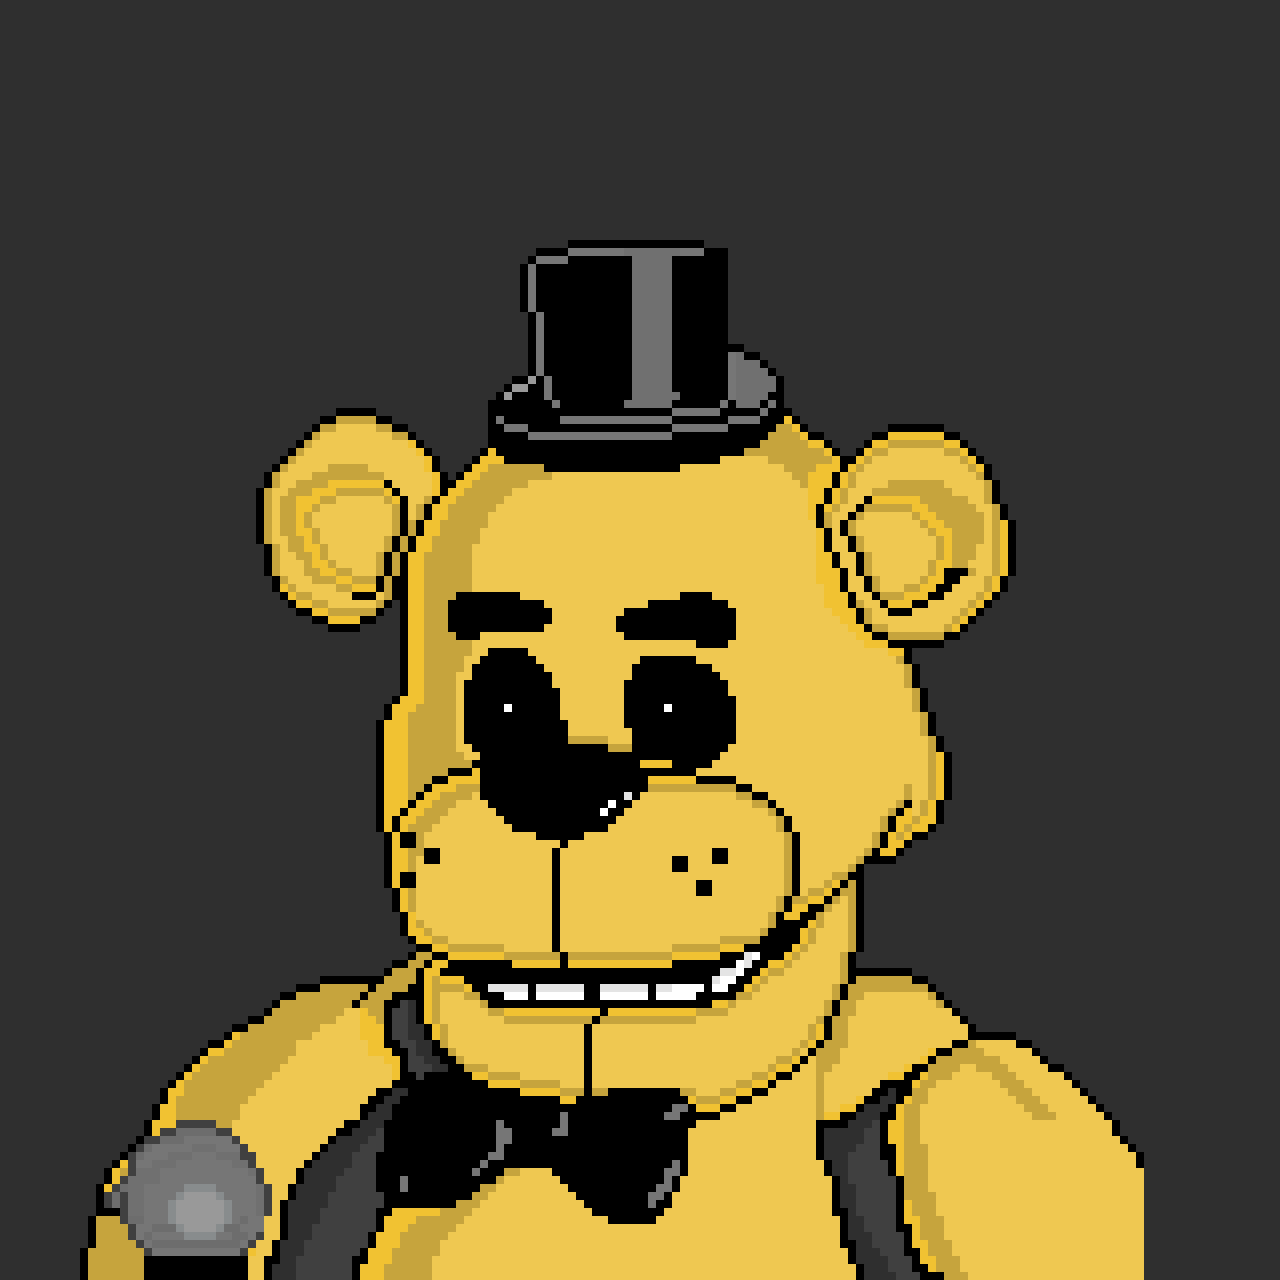 Golden Freddy (creds to wolf993454)